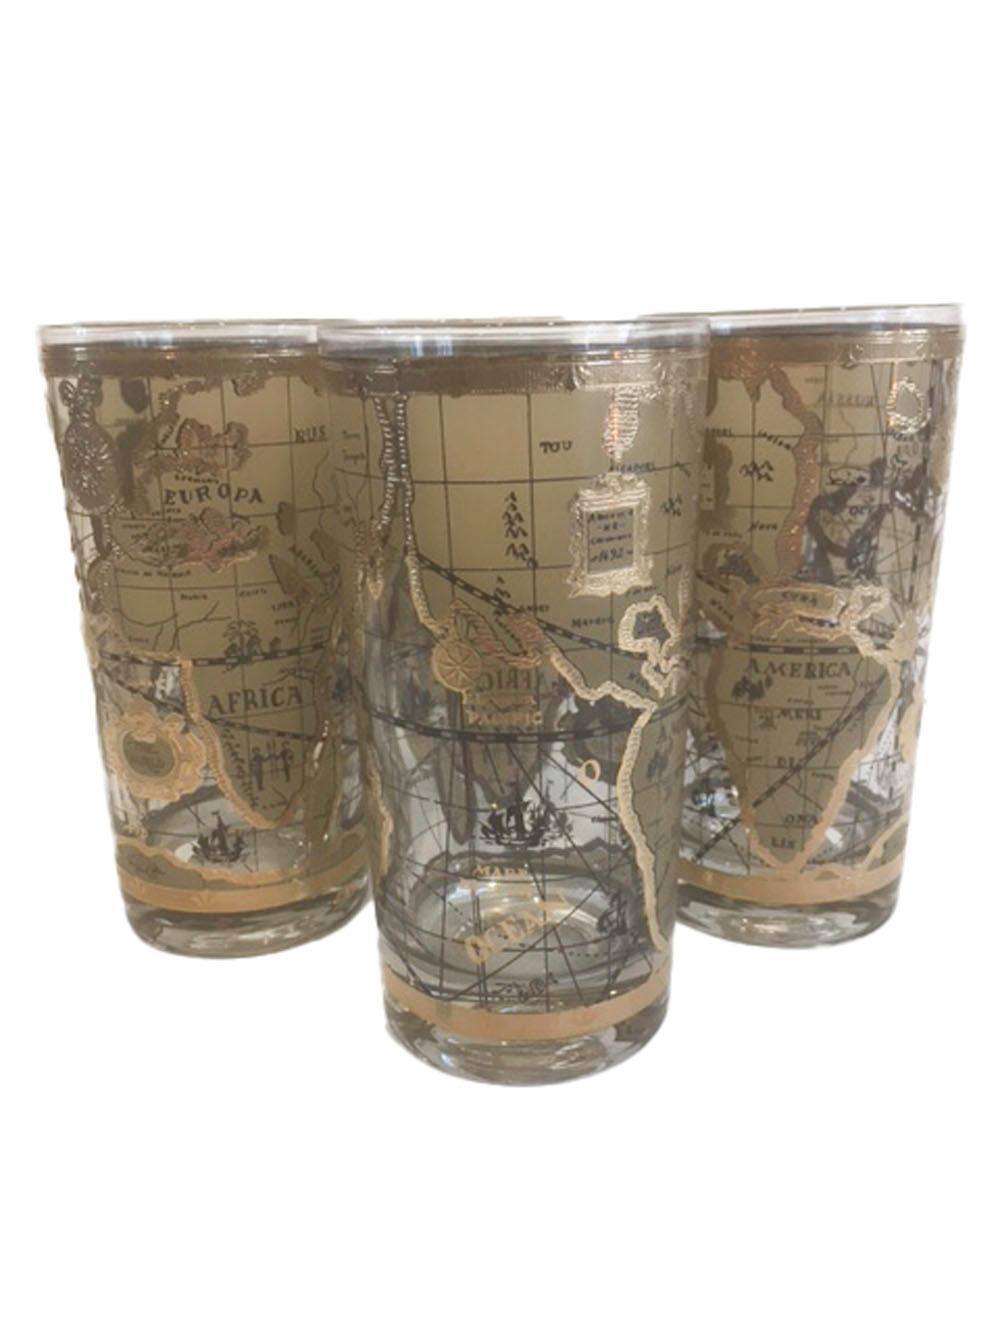 6 Vintage highball glasses by Cera Glassware decorated with an old world style map in tans and gold on clear glass. Together with a vinyl clad circular caddy with a central handle.

Measures: Caddy: 10